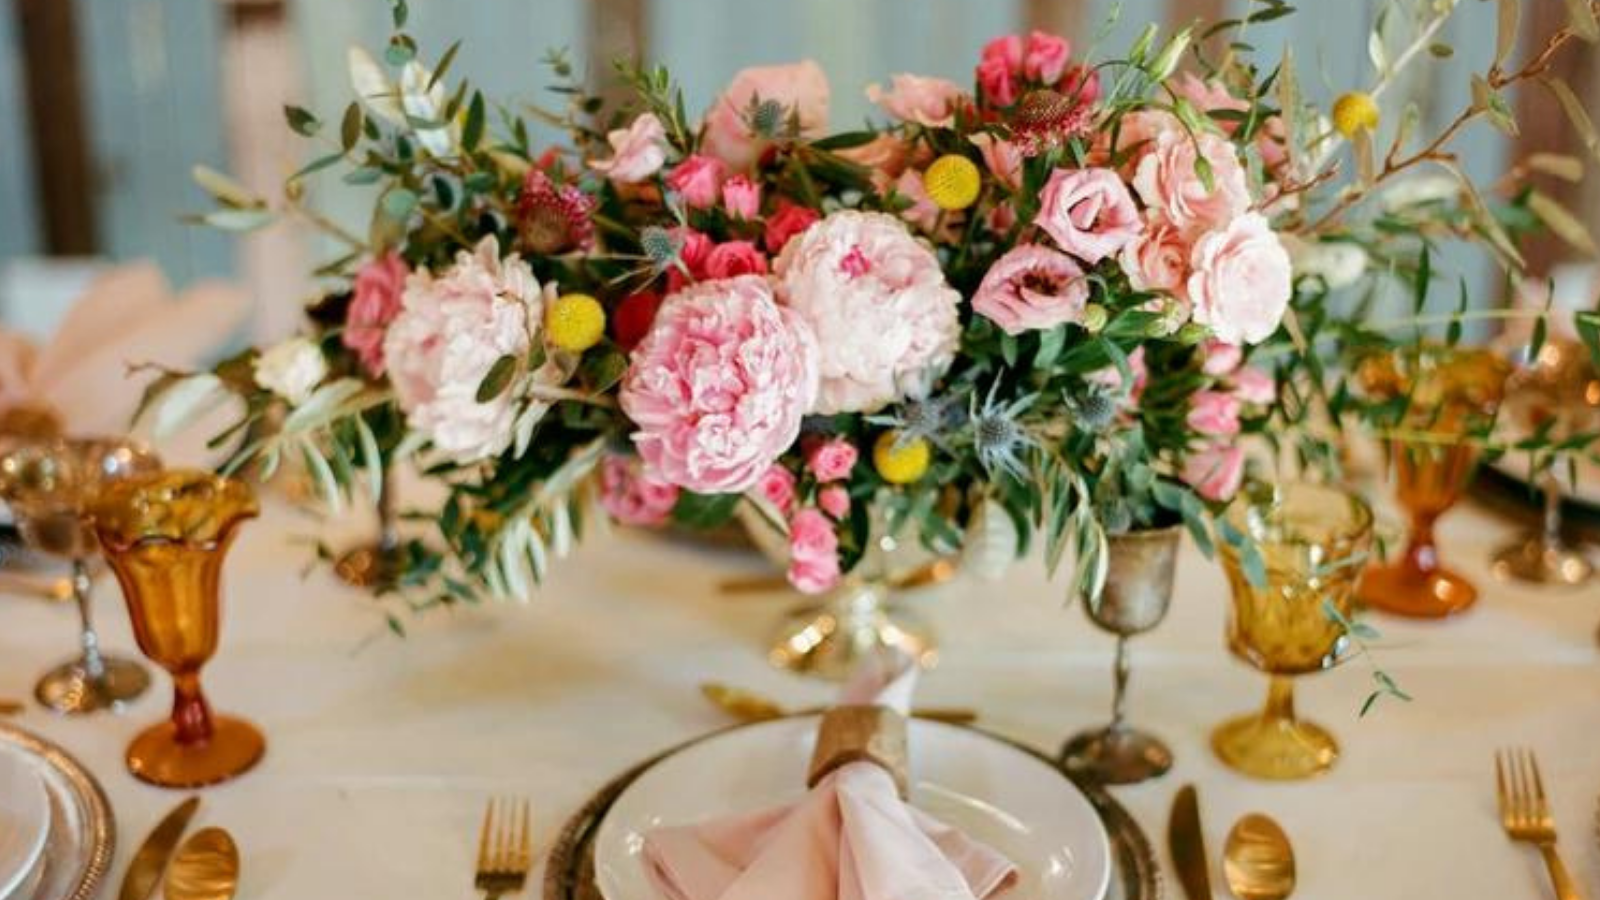 4 Austin Florists that Will Make Your Wedding Blossom